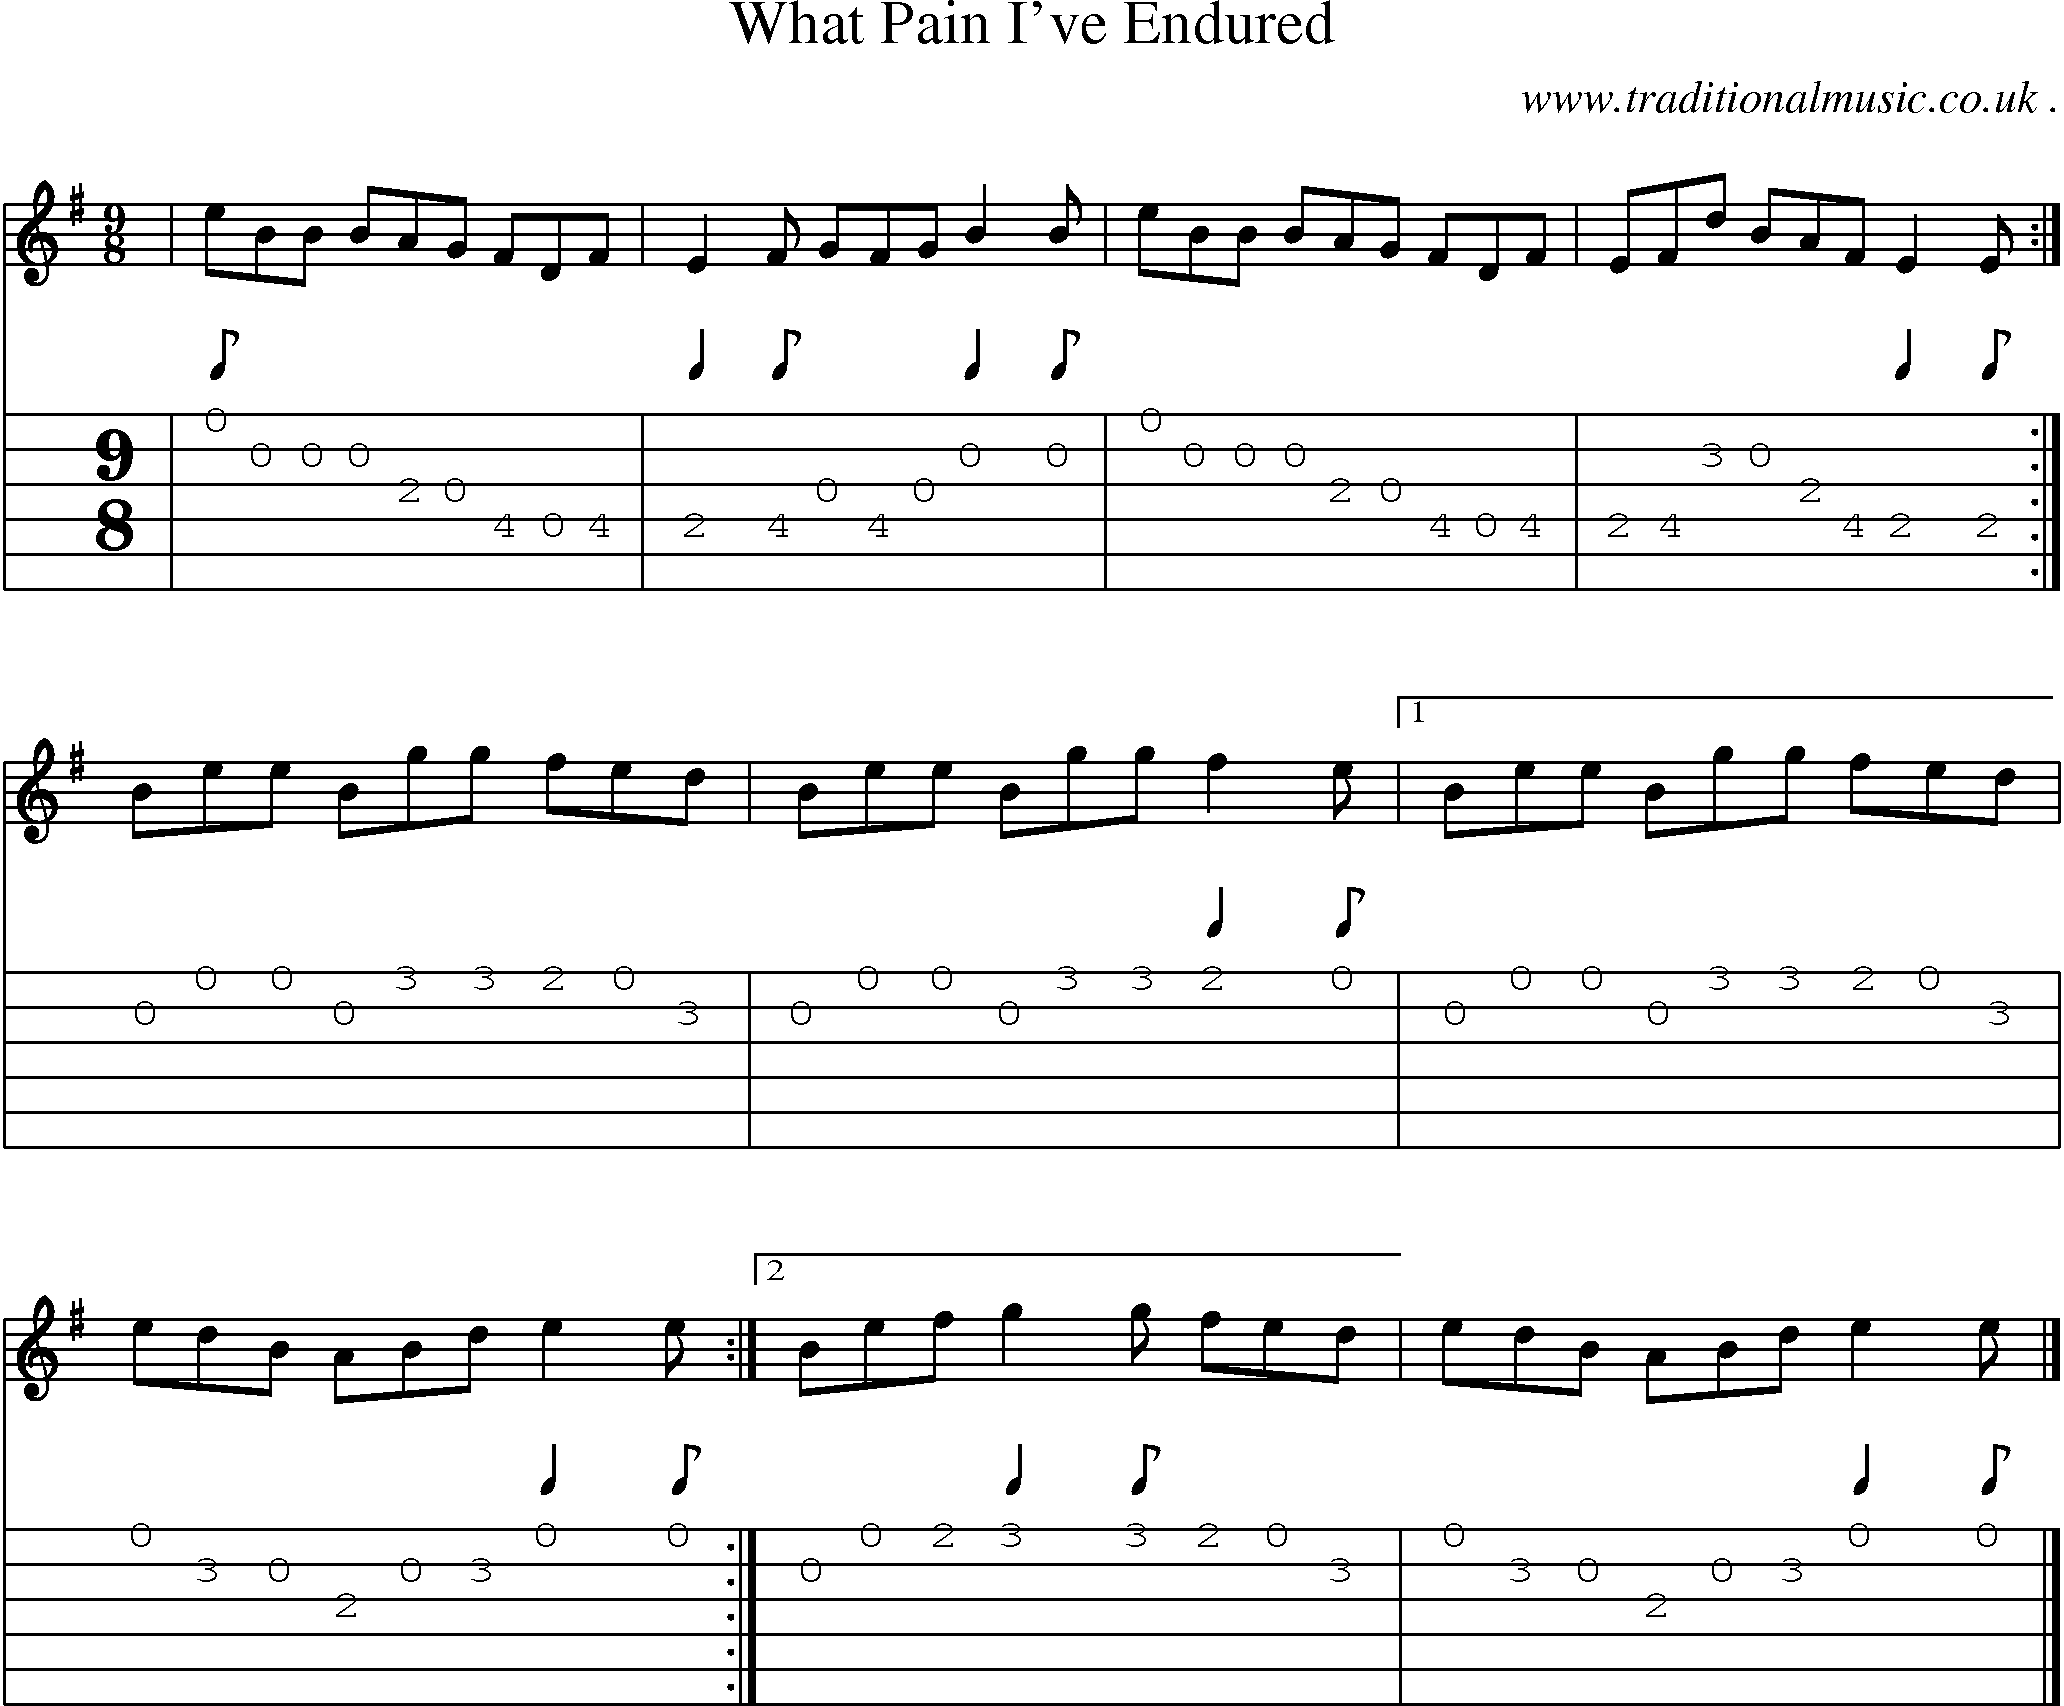 Sheet-music  score, Chords and Guitar Tabs for What Pain Ive Endured